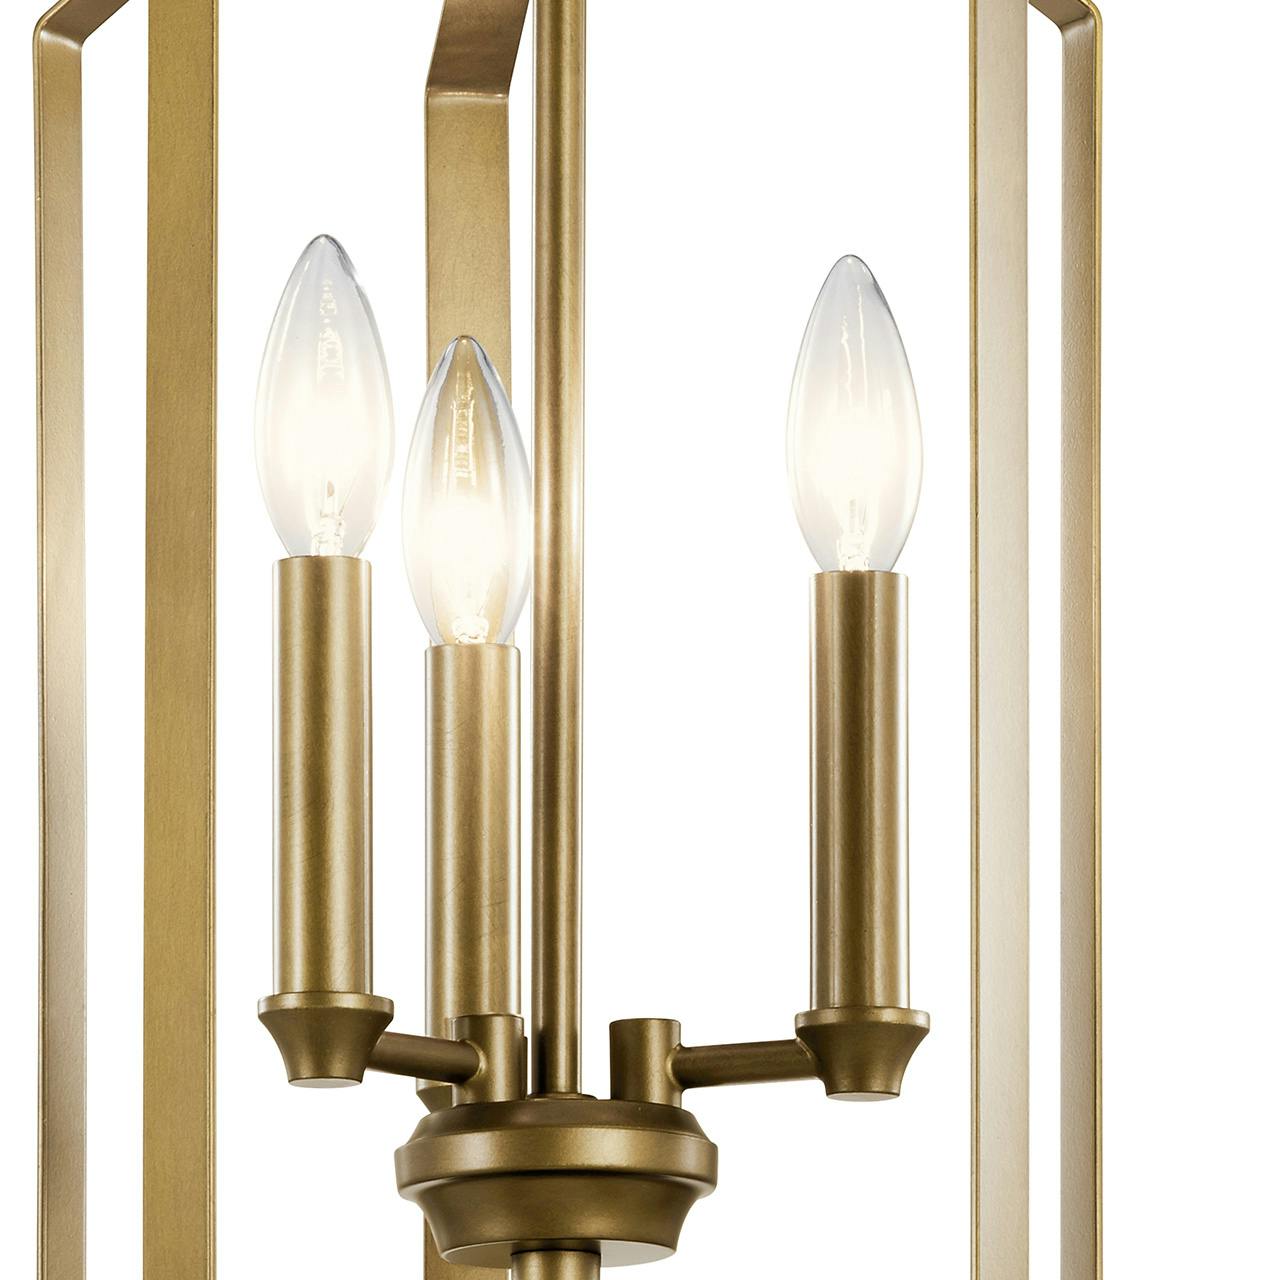 Close up view of the Morrigan 21" 3 Light Foyer Pendant Brass on a white background